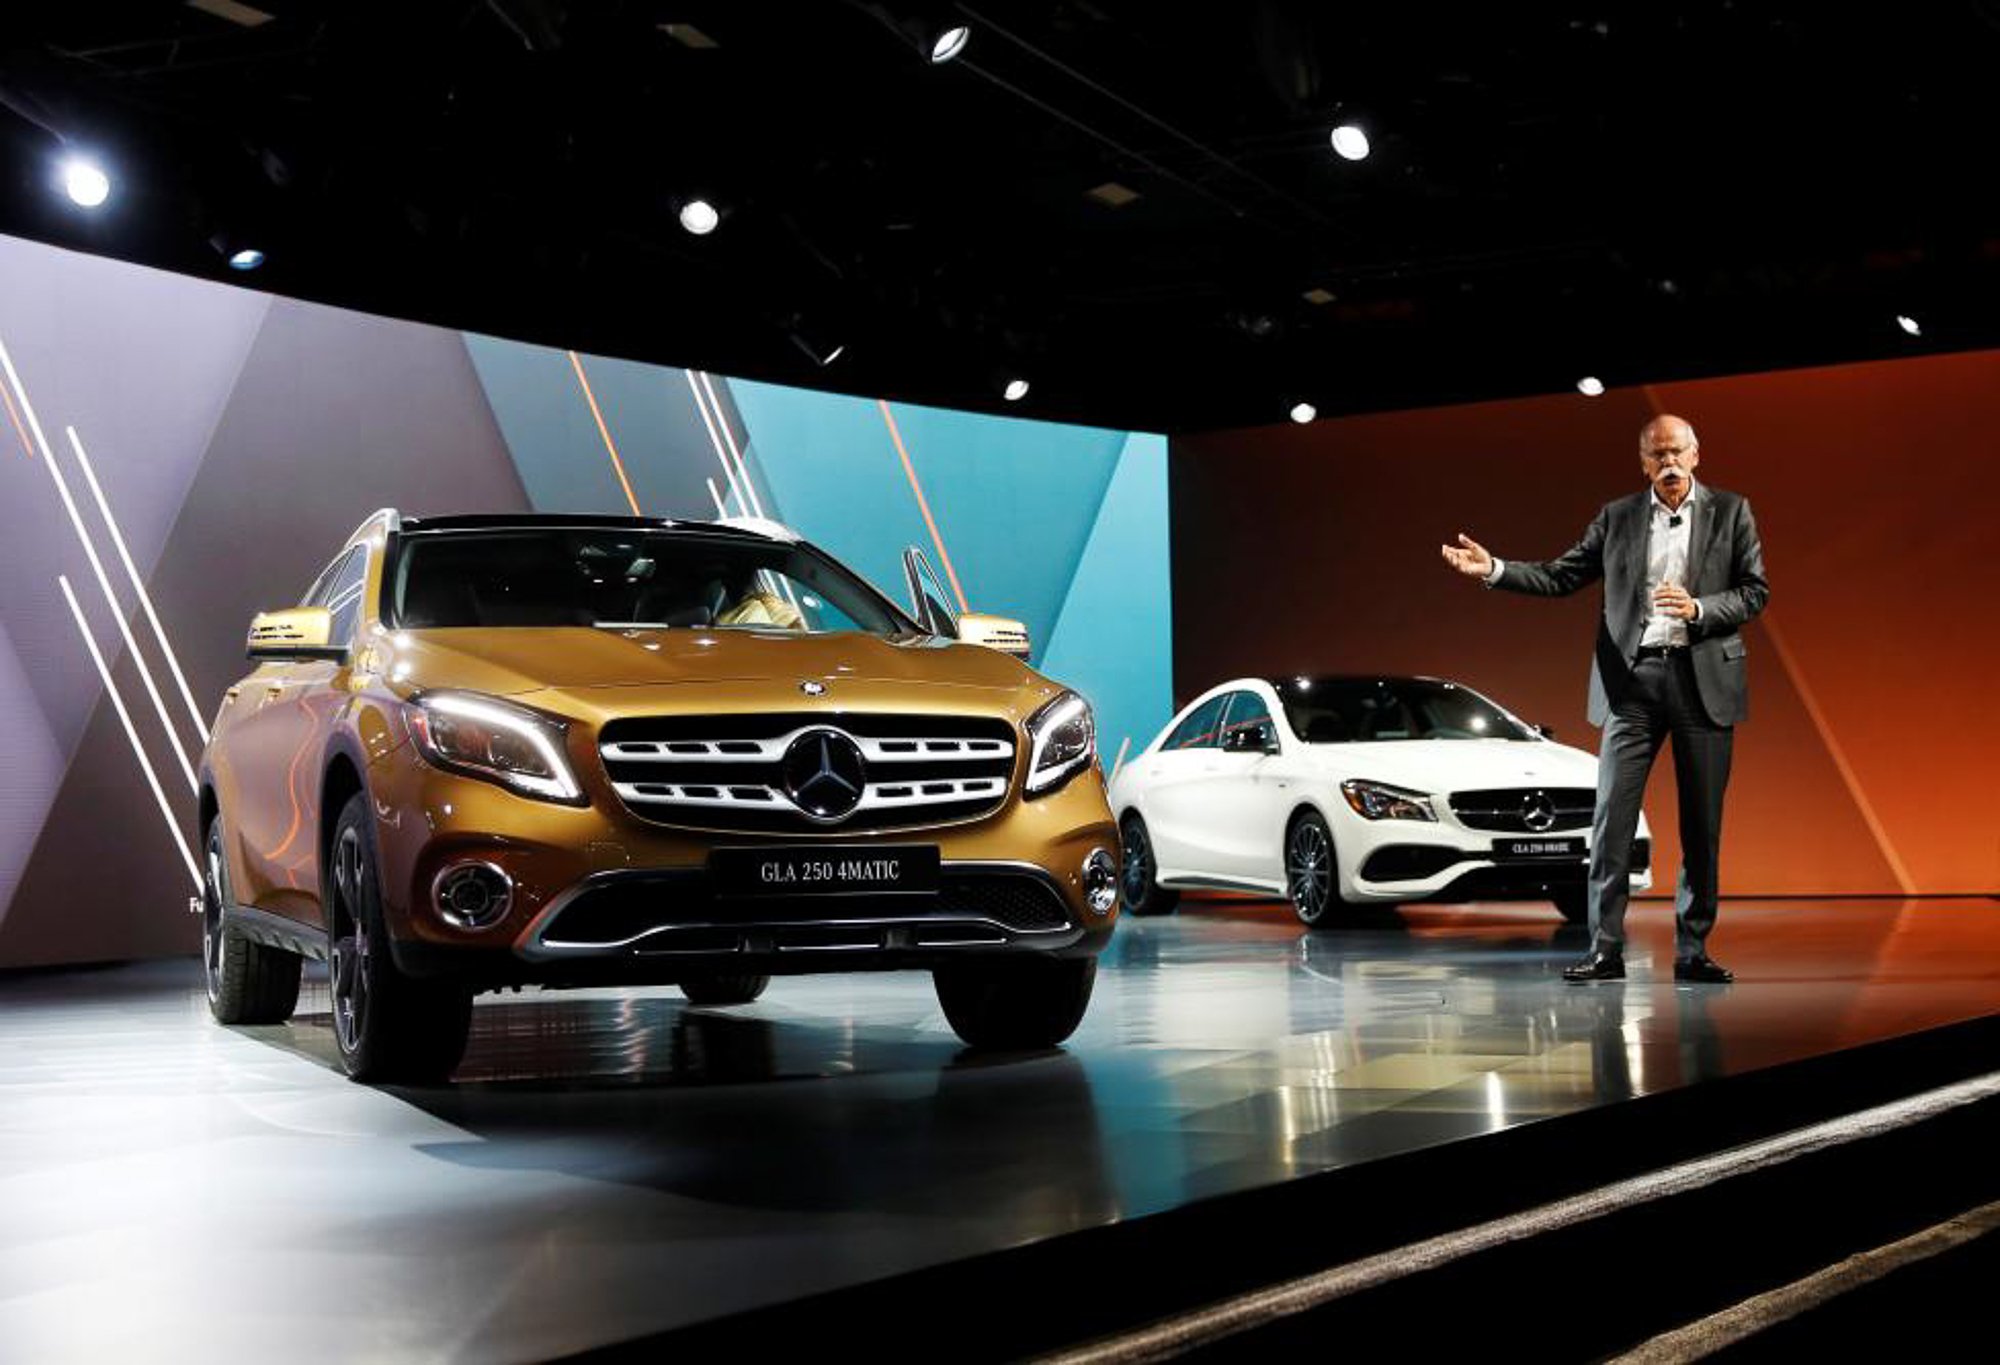 Chairman of the Board of Directors of Daimler AG Dieter Zetsche speaks in front of the revealed Mercedes-Benz GLA 250. PHOTO: REUTERS 